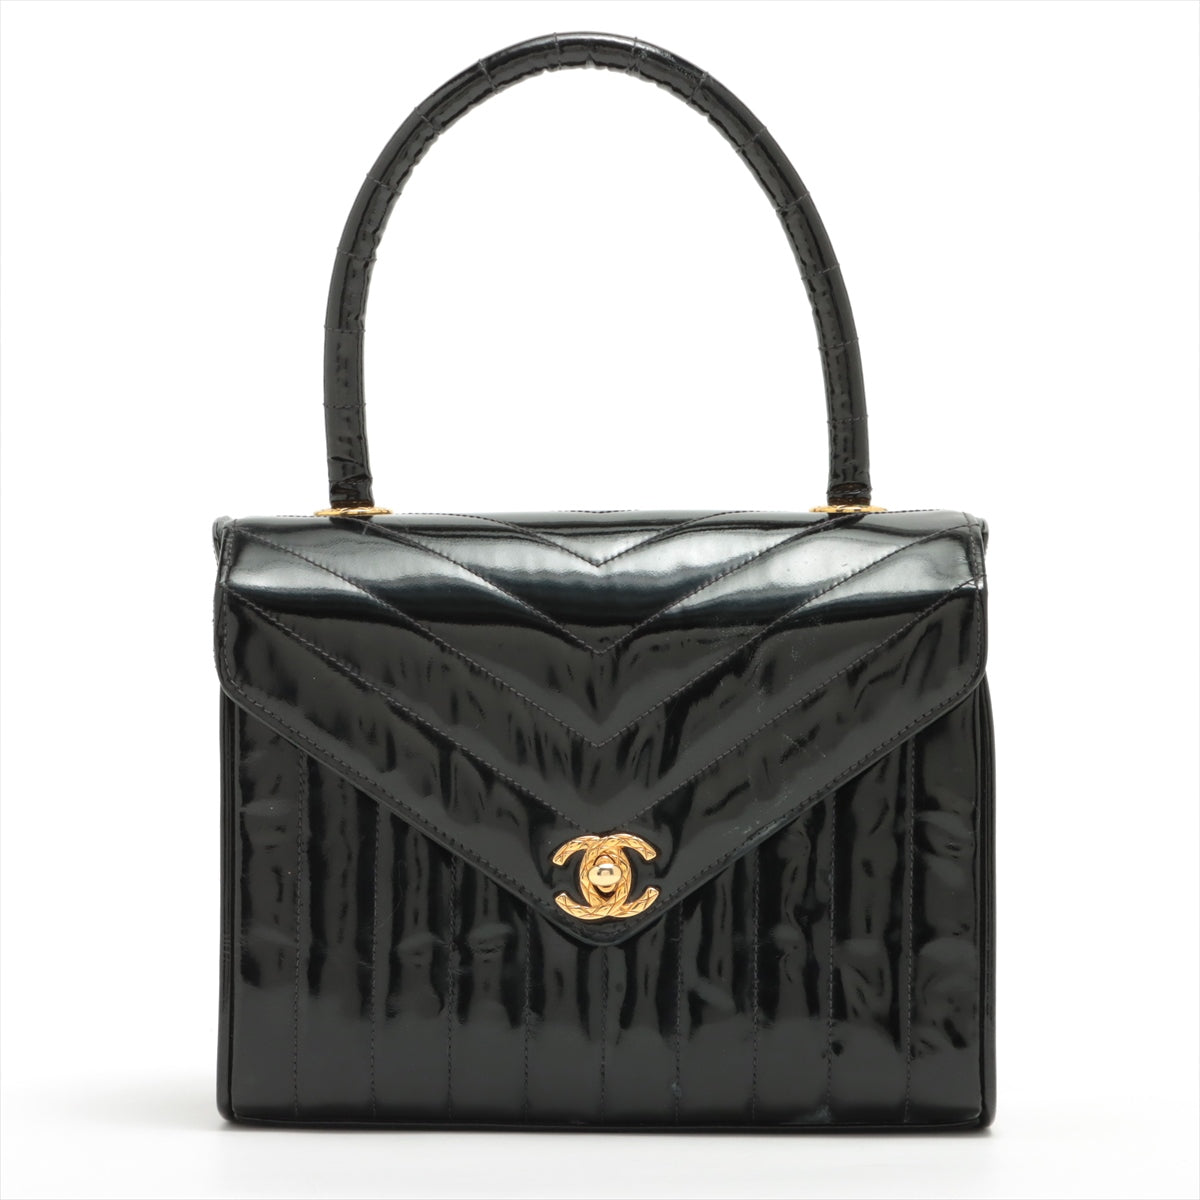 Chanel V Stitch Patent leather Hand bag Black Gold Metal fittings